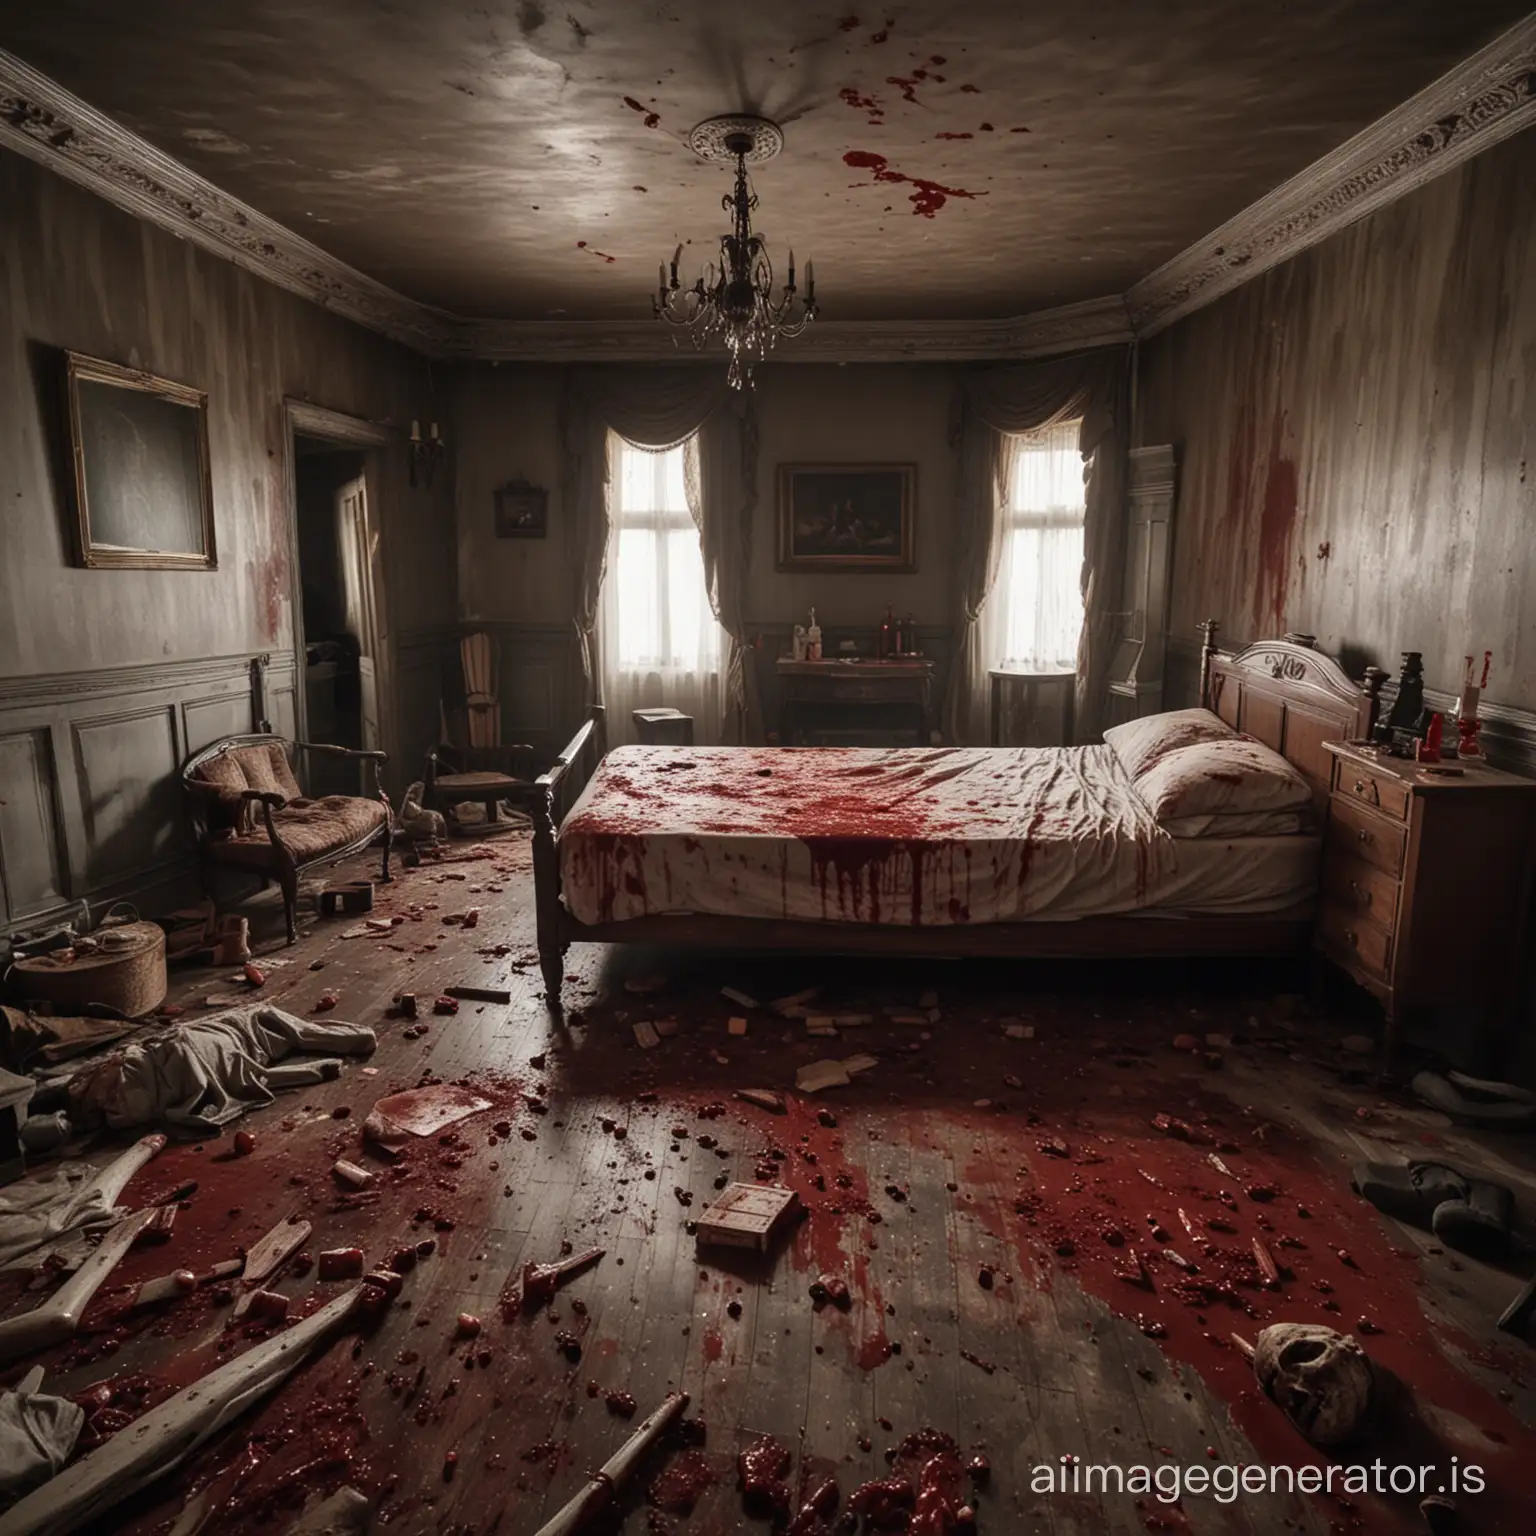 Fully furnitured room with a bloody dead body in the middle